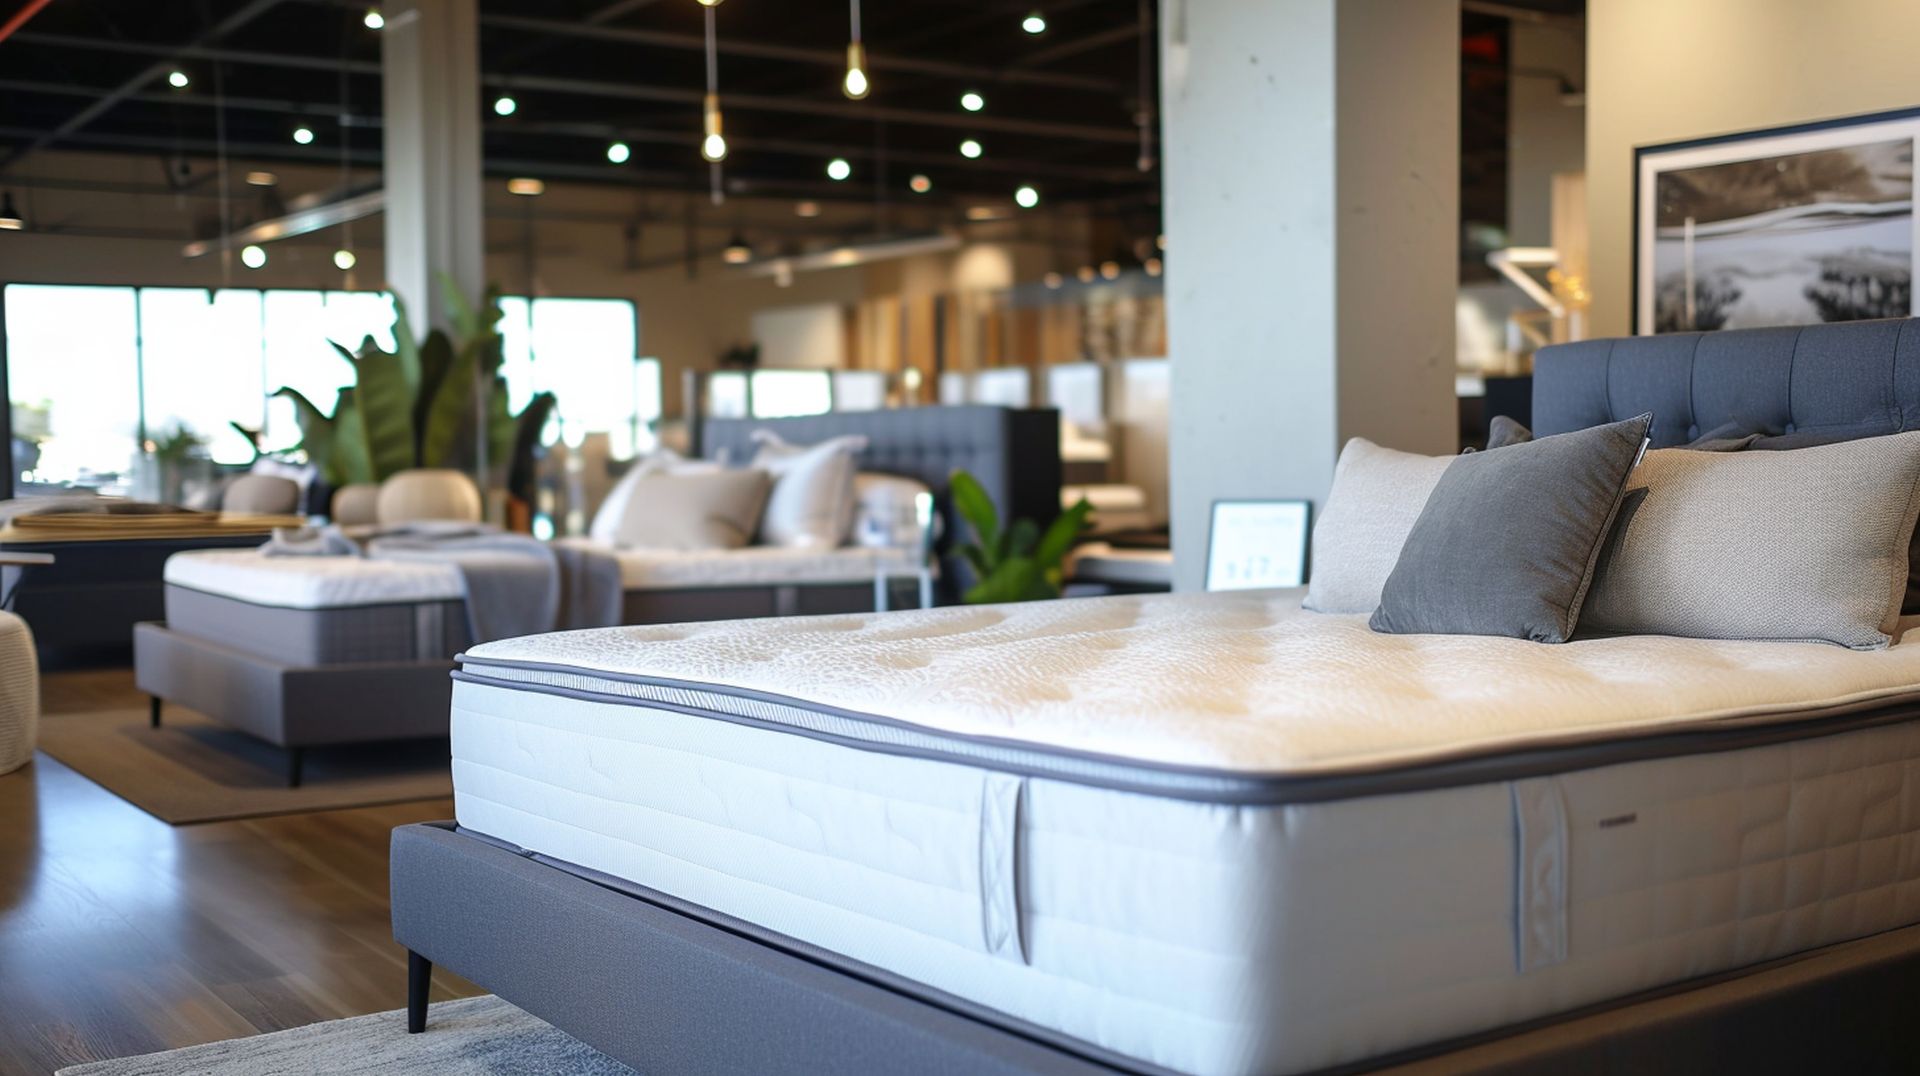 Local Pasco mattress stores have the best prices, sales, and deals if you're looking for a new mattress in Pasco